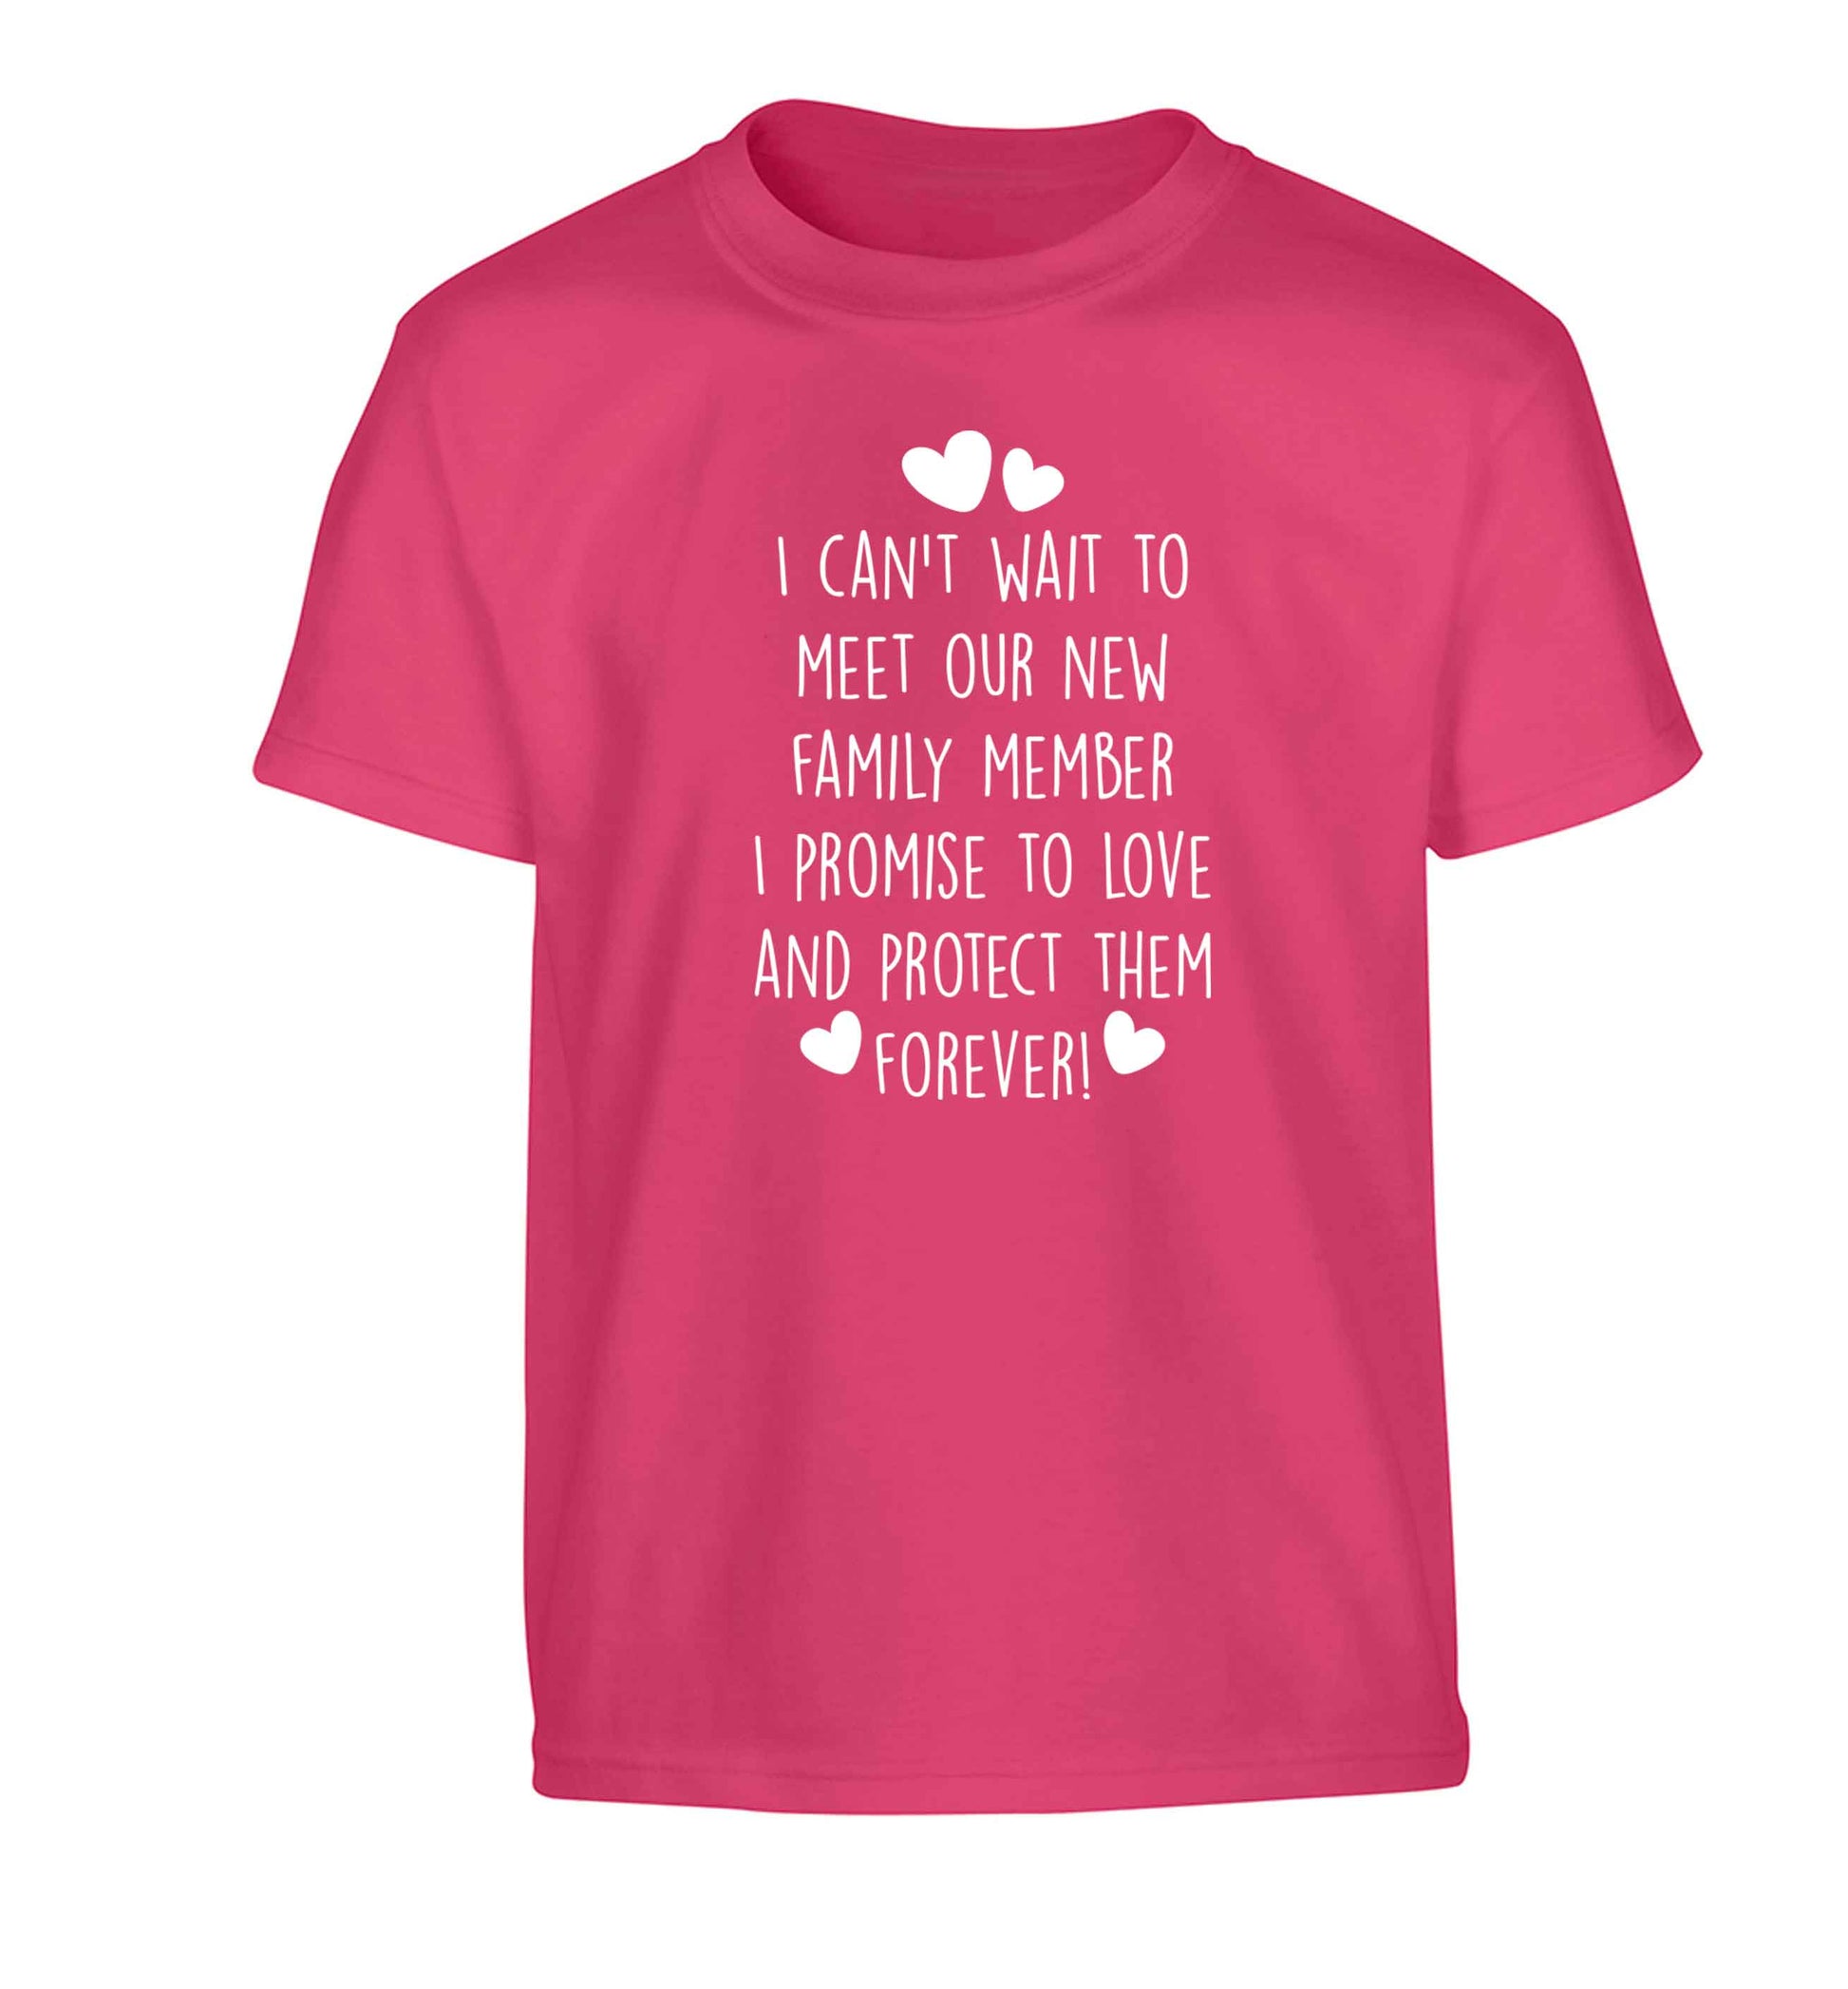 I can't wait to meet our new family member I promise to love and protect them foreverChildren's pink Tshirt 12-13 Years